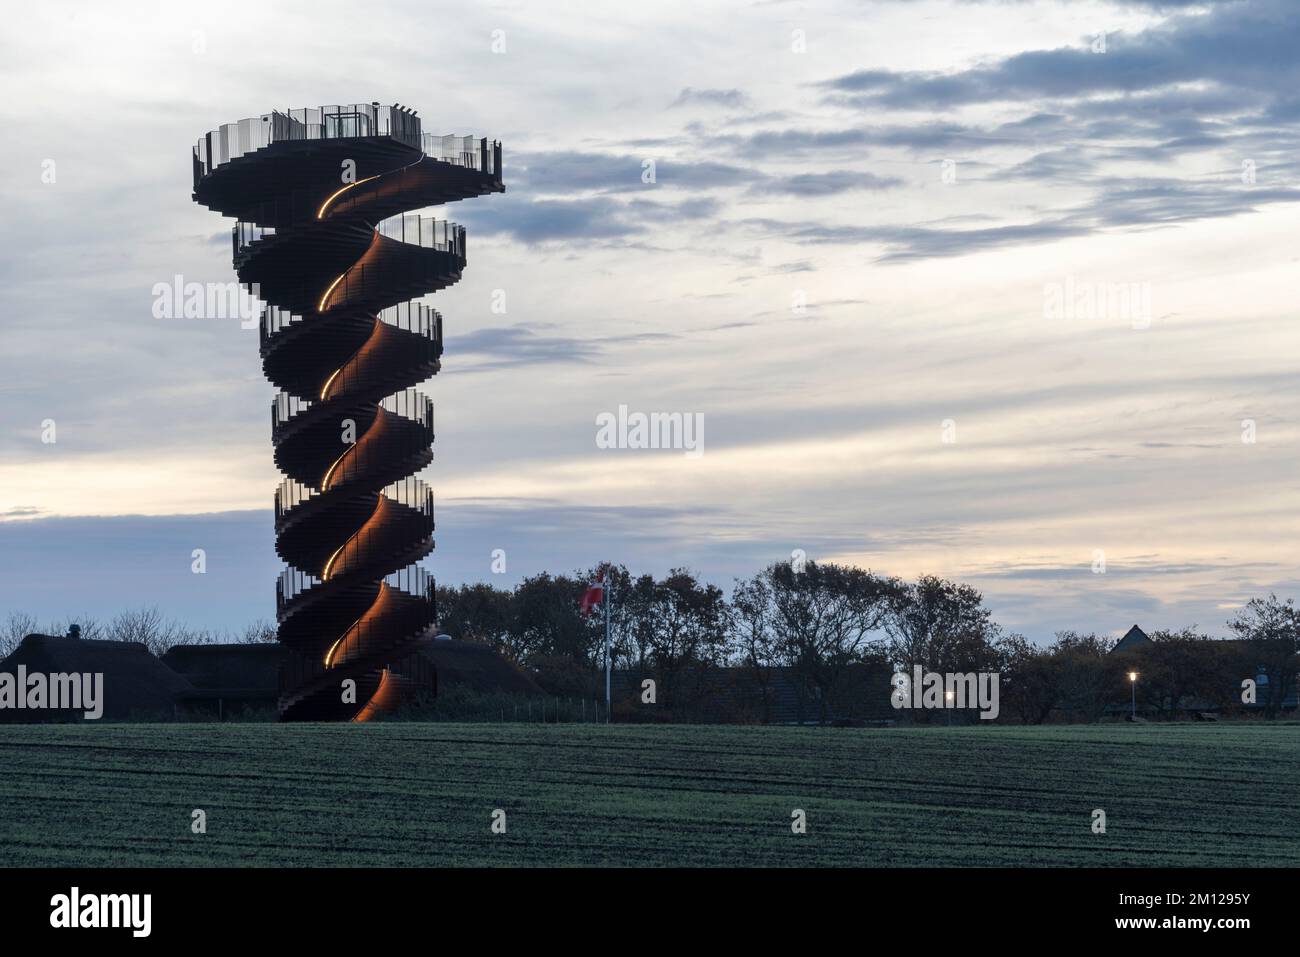 Marsk Tower, double helix-shaped observation tower made of Corten steel, designed by Bjarke Ingels Group, located in the Wadden Sea National Park, Skærbæk, Syddanmark, Denmark Stock Photo